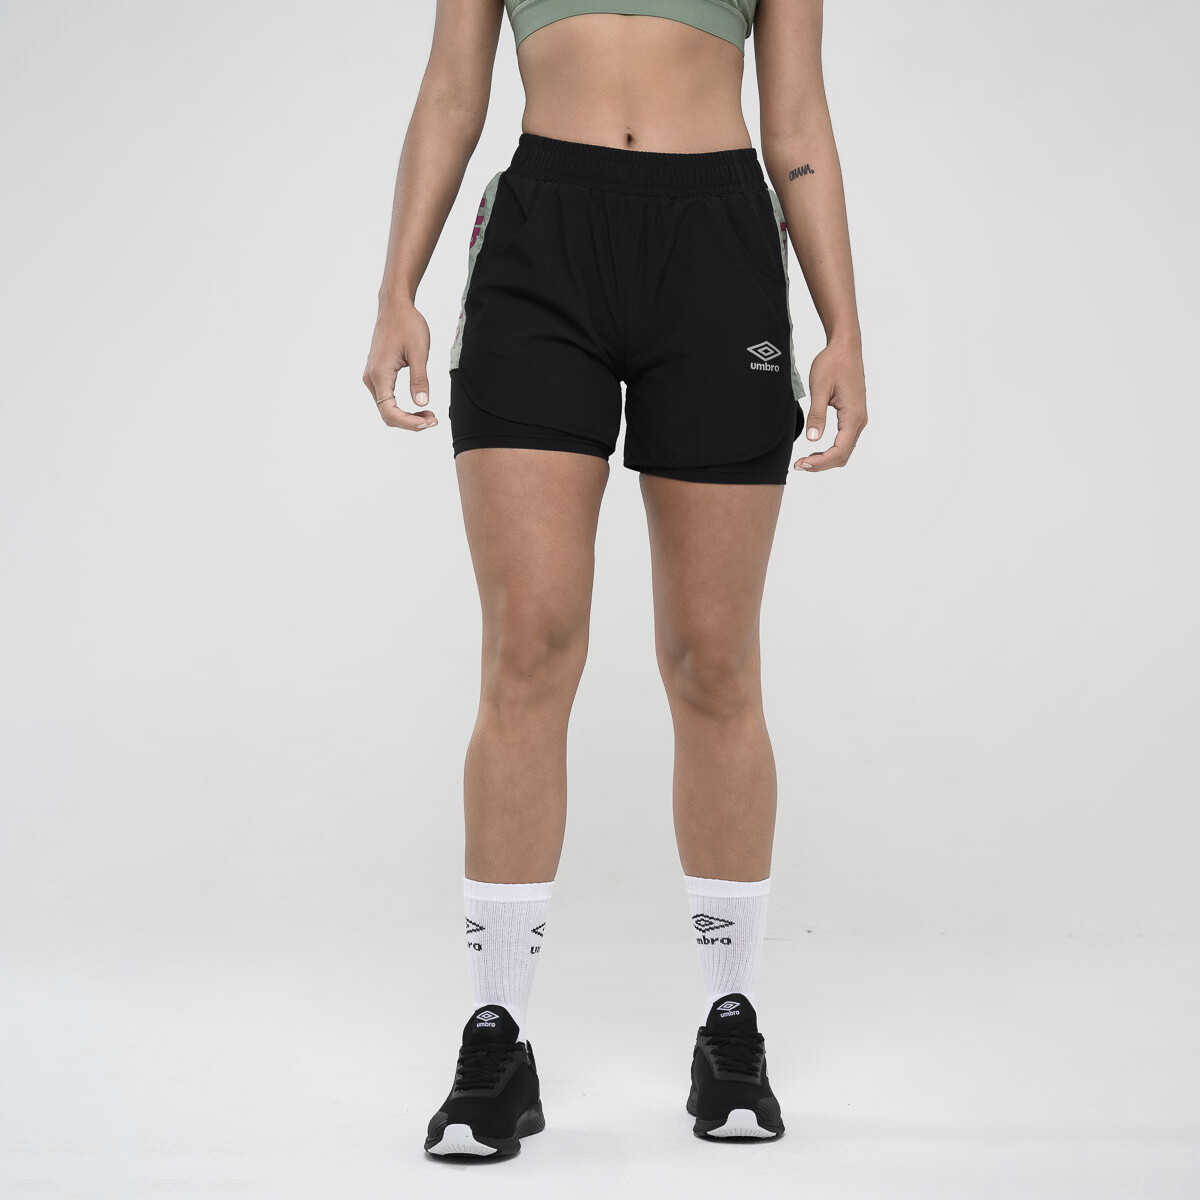 Short Active Umbro Mujer - 2vr 